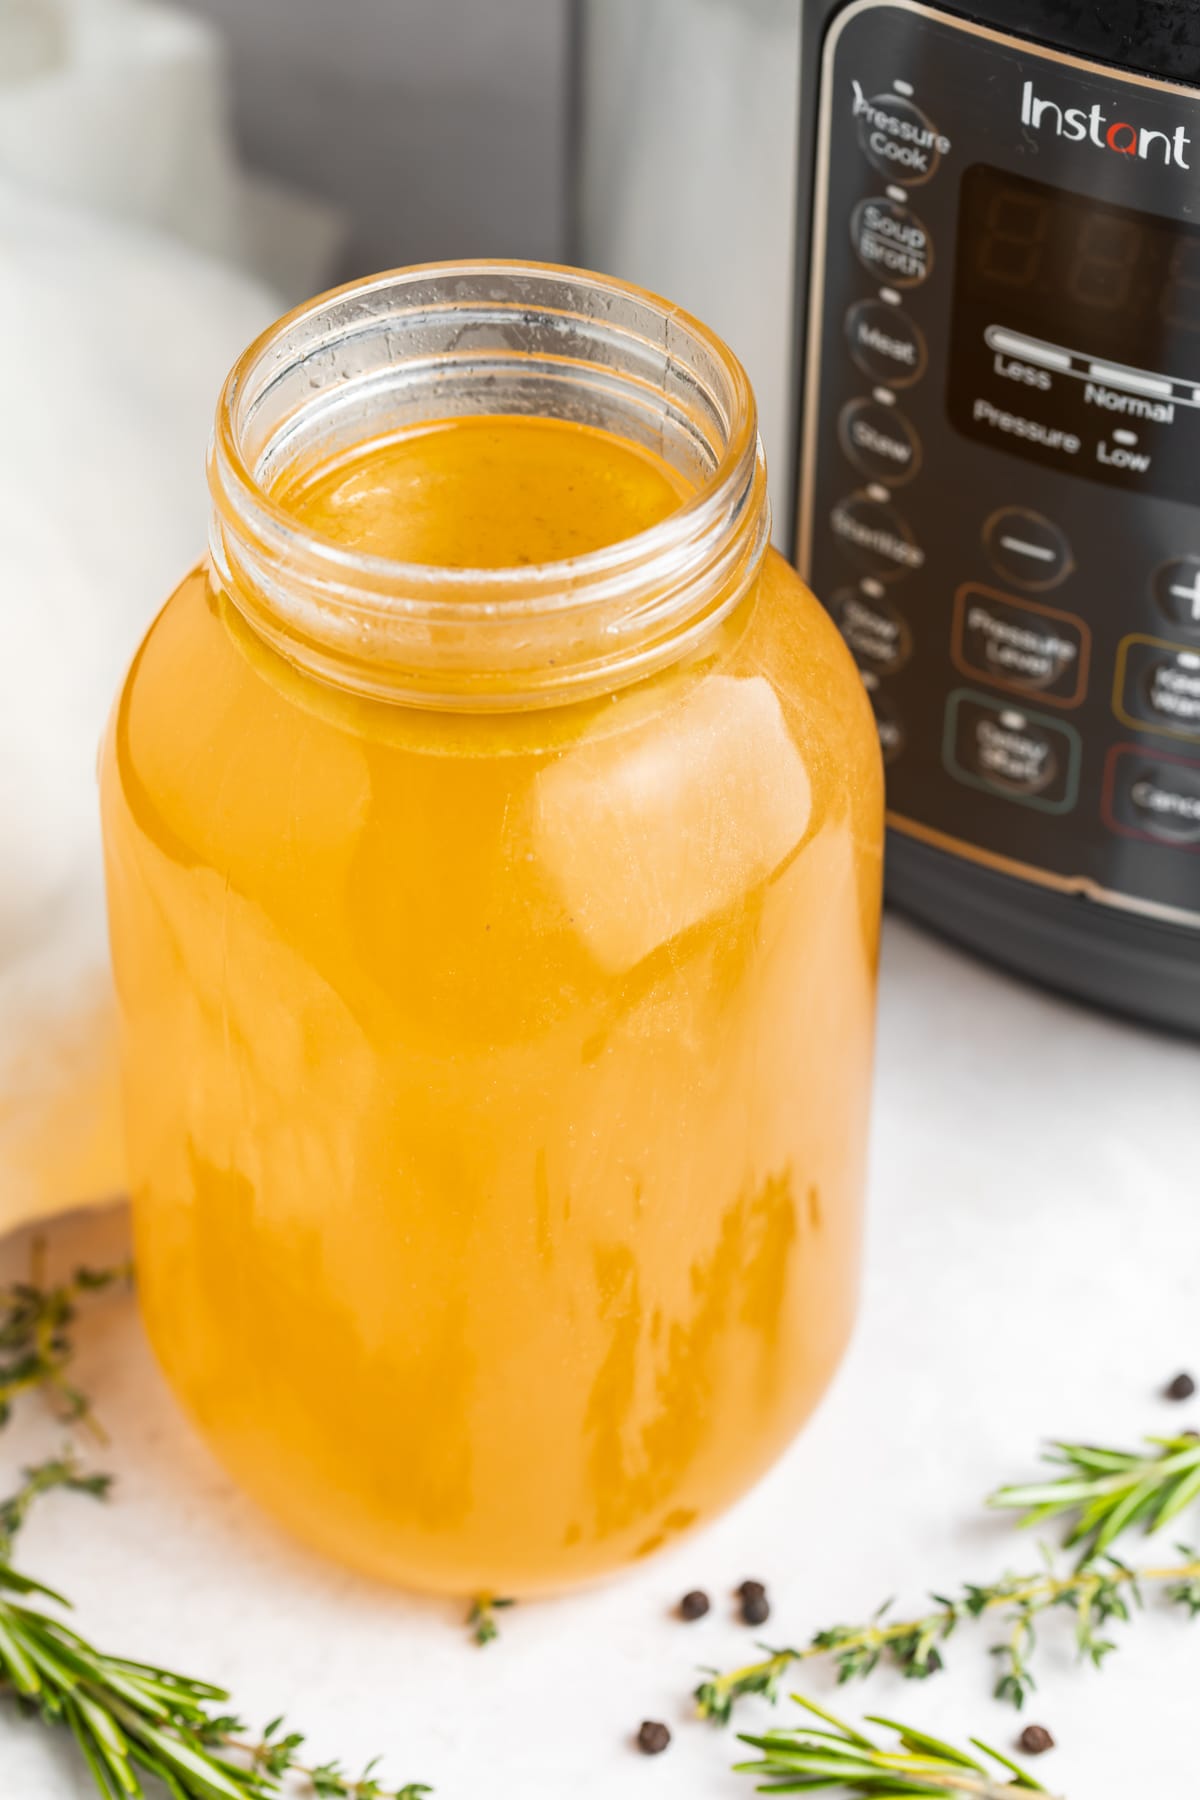 A mason jar of golden yellow turkey stock resting in front of an Instant Pot surrounded by fresh herbs.